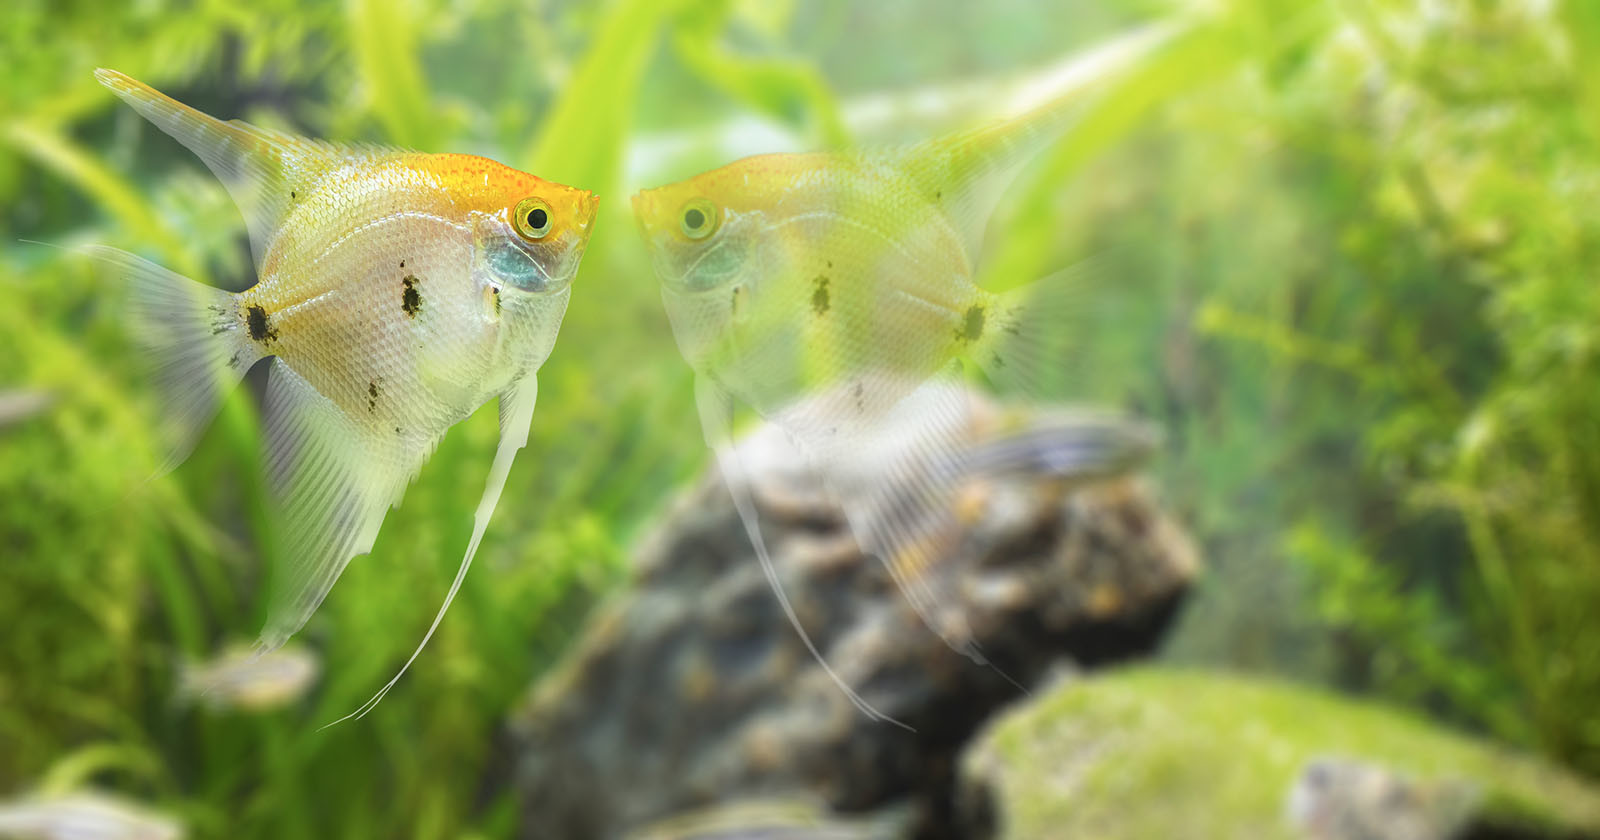 Fish Can Recognize Themselves in Photos, Study Finds